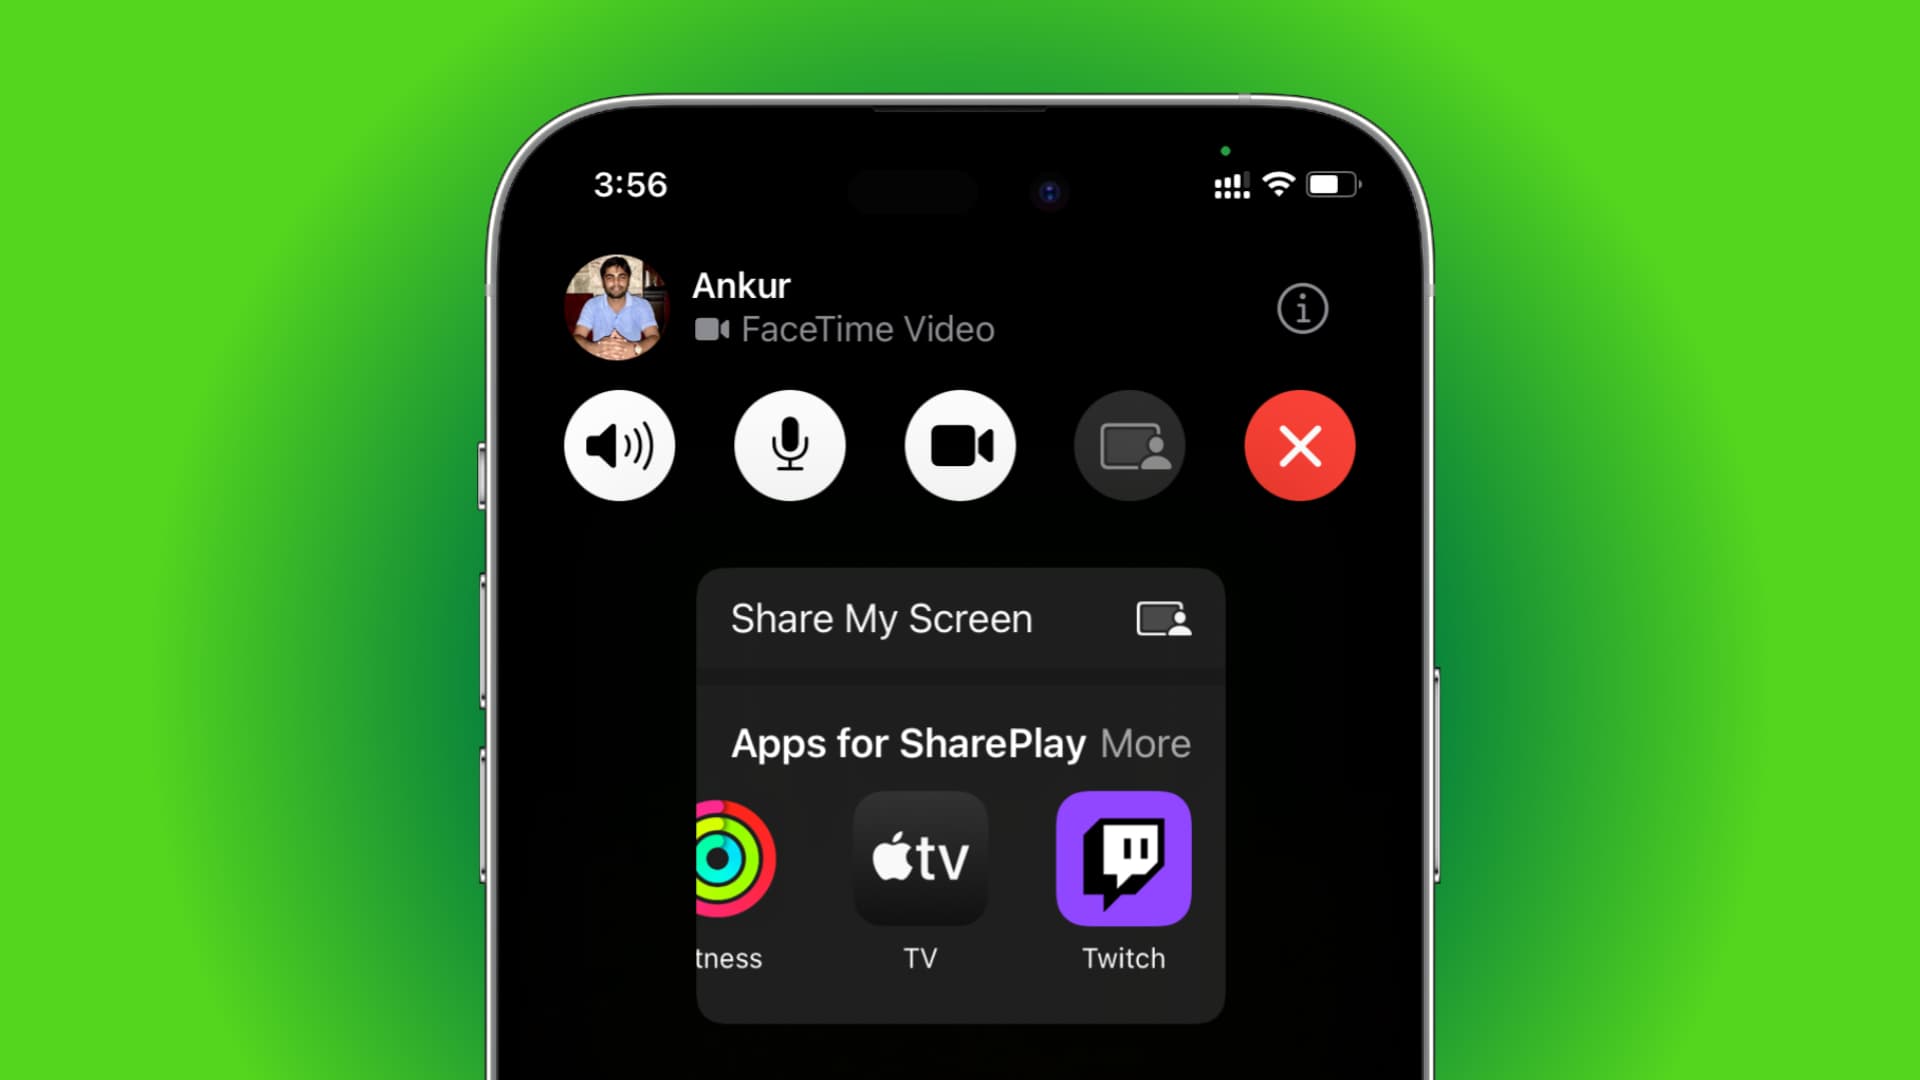 SharePlay powers new ways to stay connected and share experiences in  FaceTime - Apple